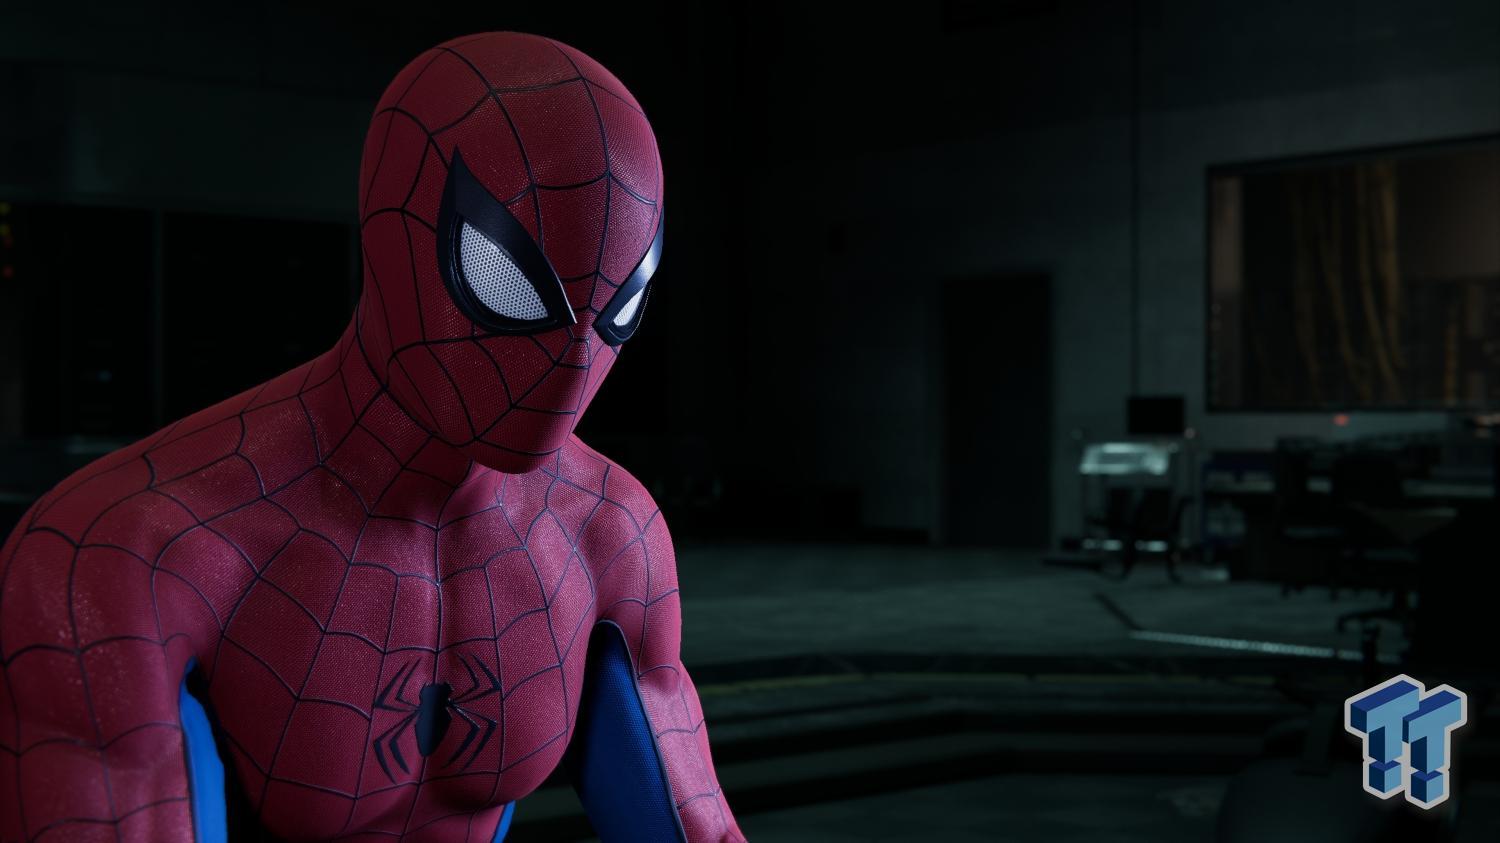 Marvel's Spider-Man (PC) Review: With Great Power Comes Great DLSS